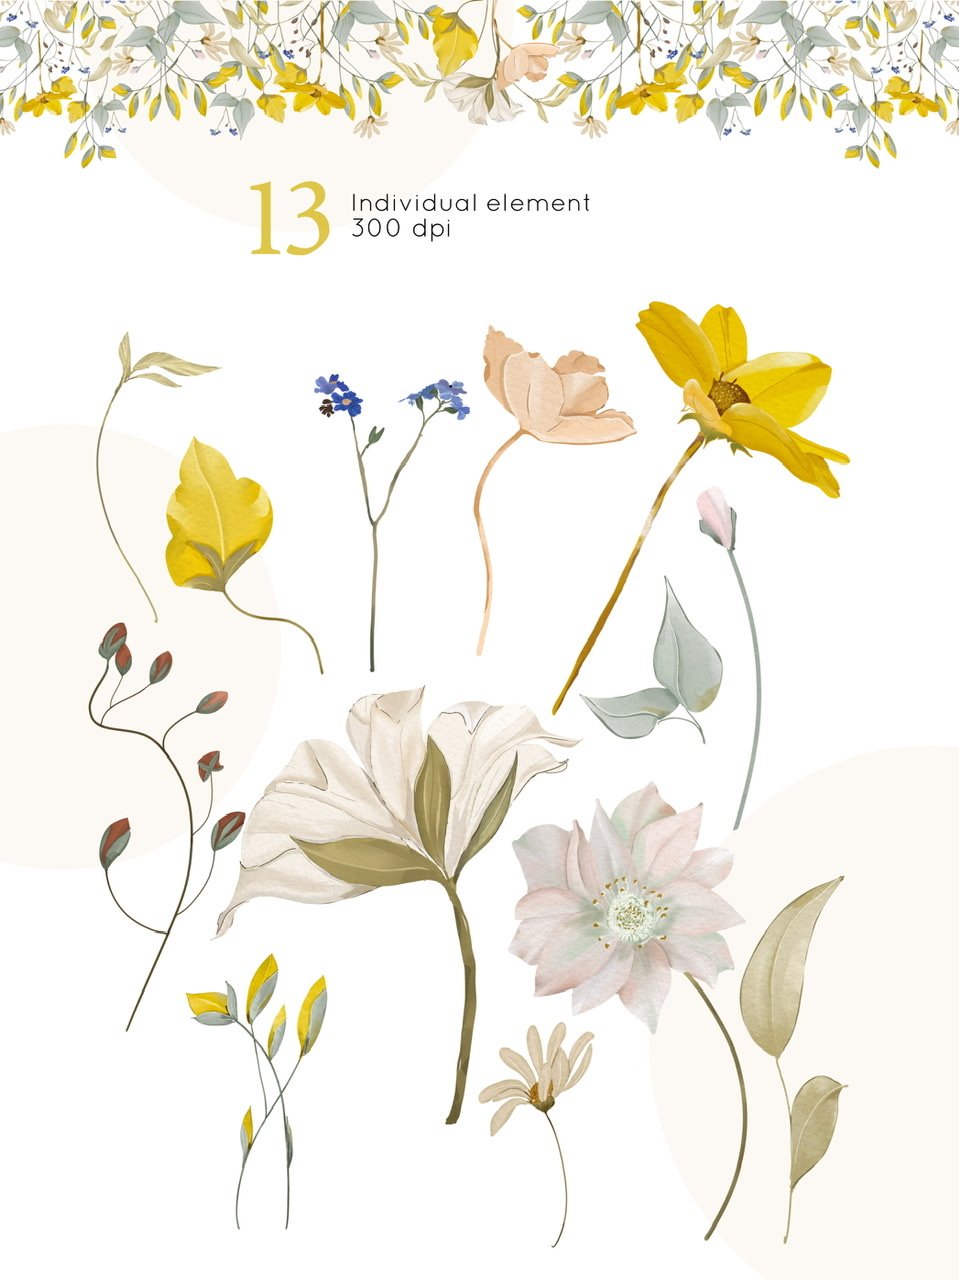 Clipart of 13 different individual floral elements.